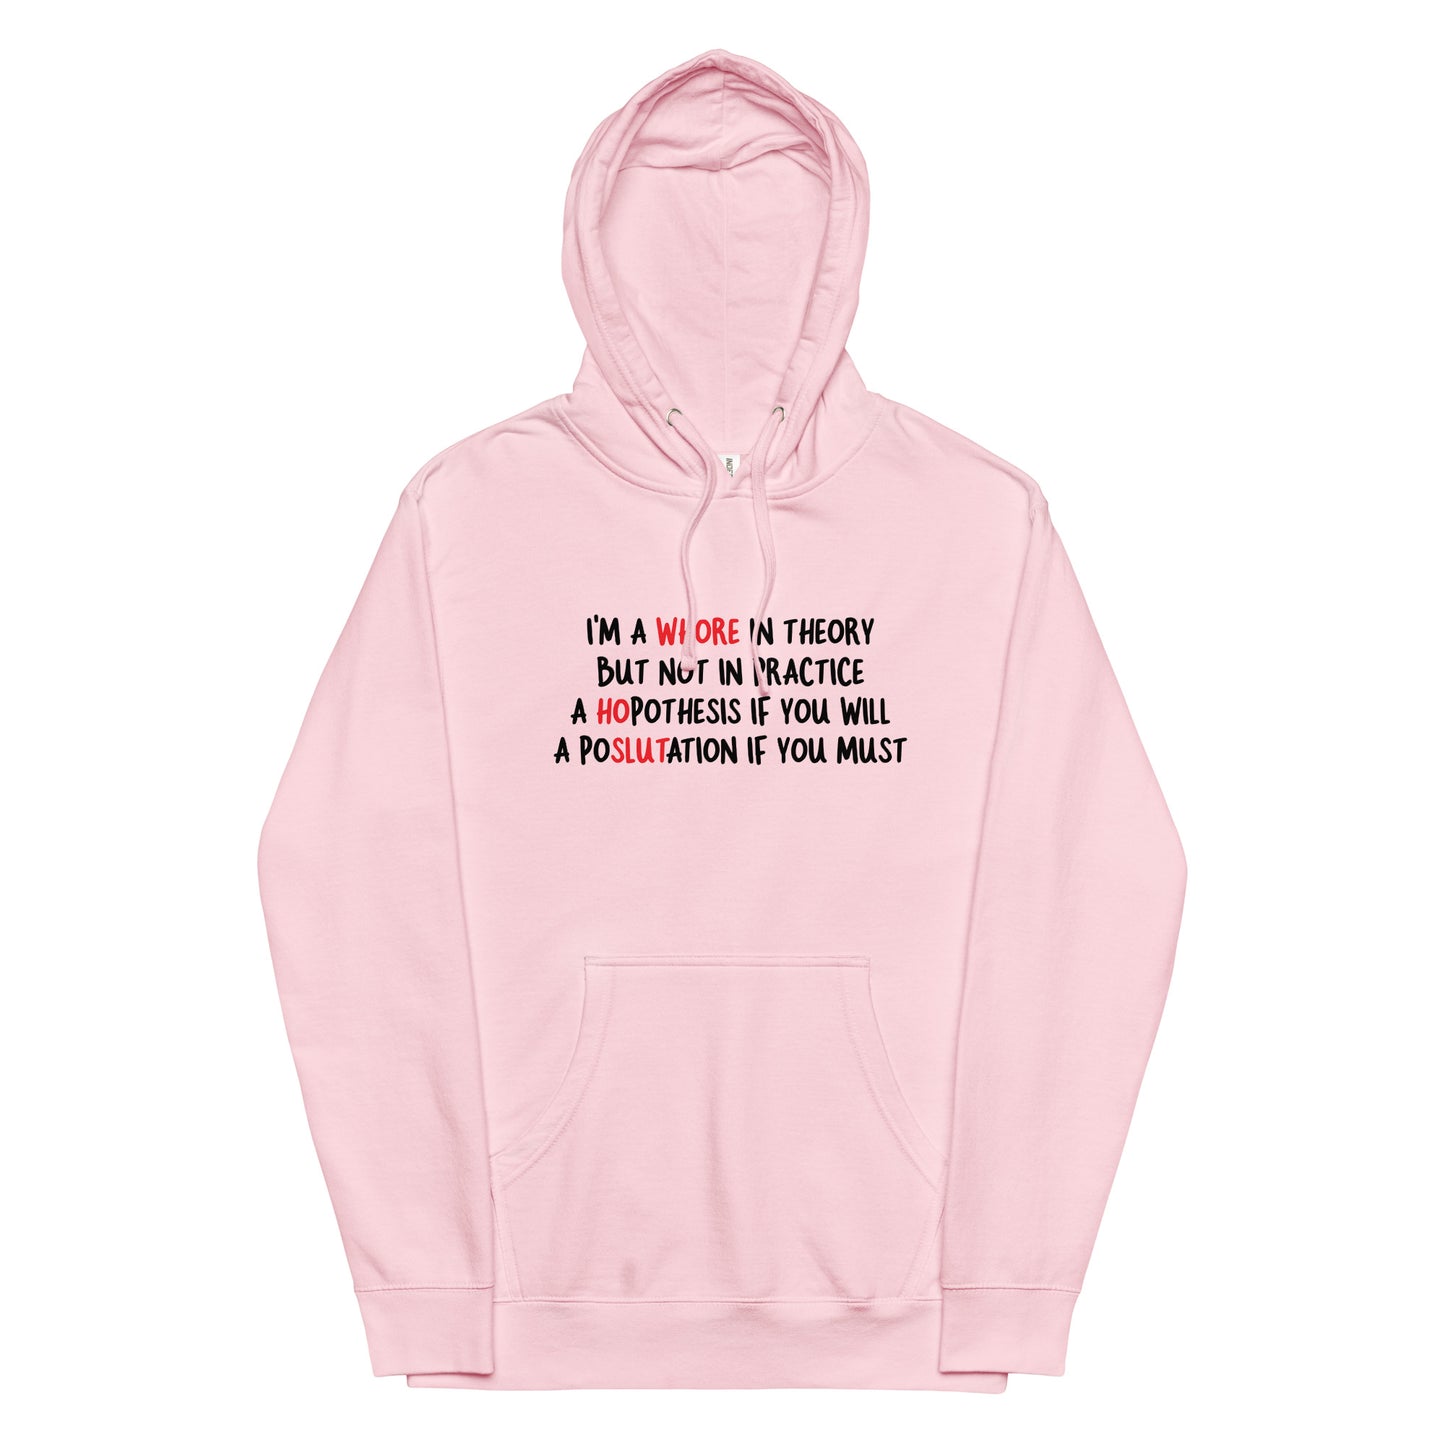 A Whore in Theory but Not in Practice Unisex hoodie